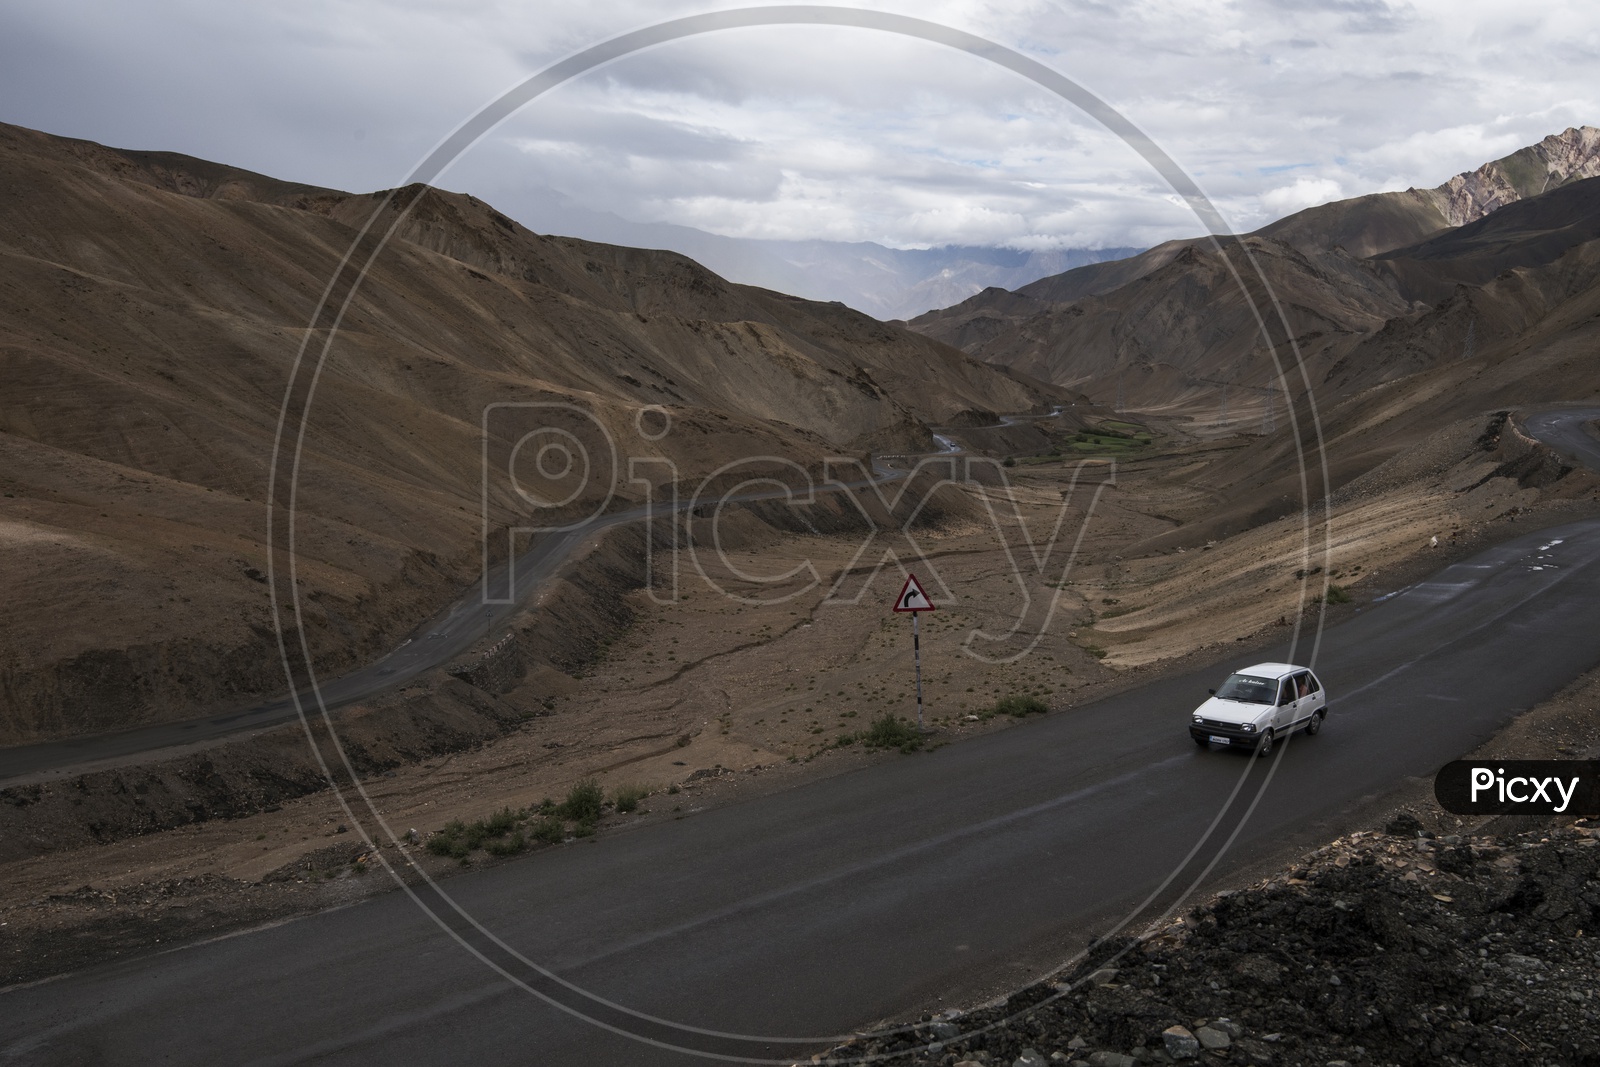 Maruti 800 on Highways in Leh and Mountains